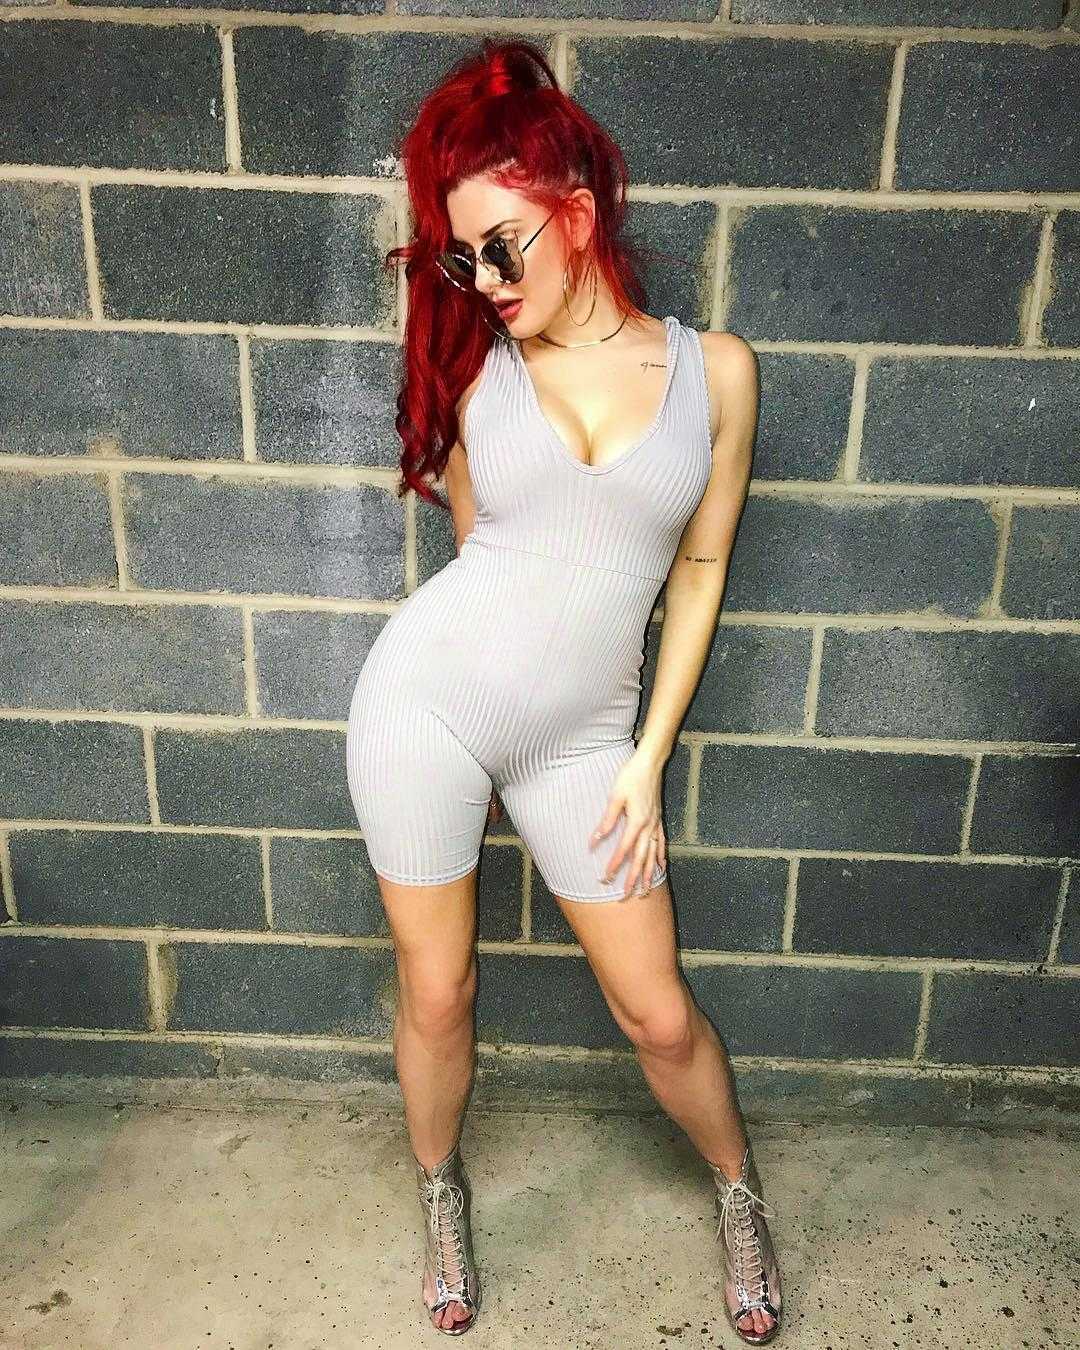 70+ Justina Valentine Hot Pictures Are Delight For Fans 15. 